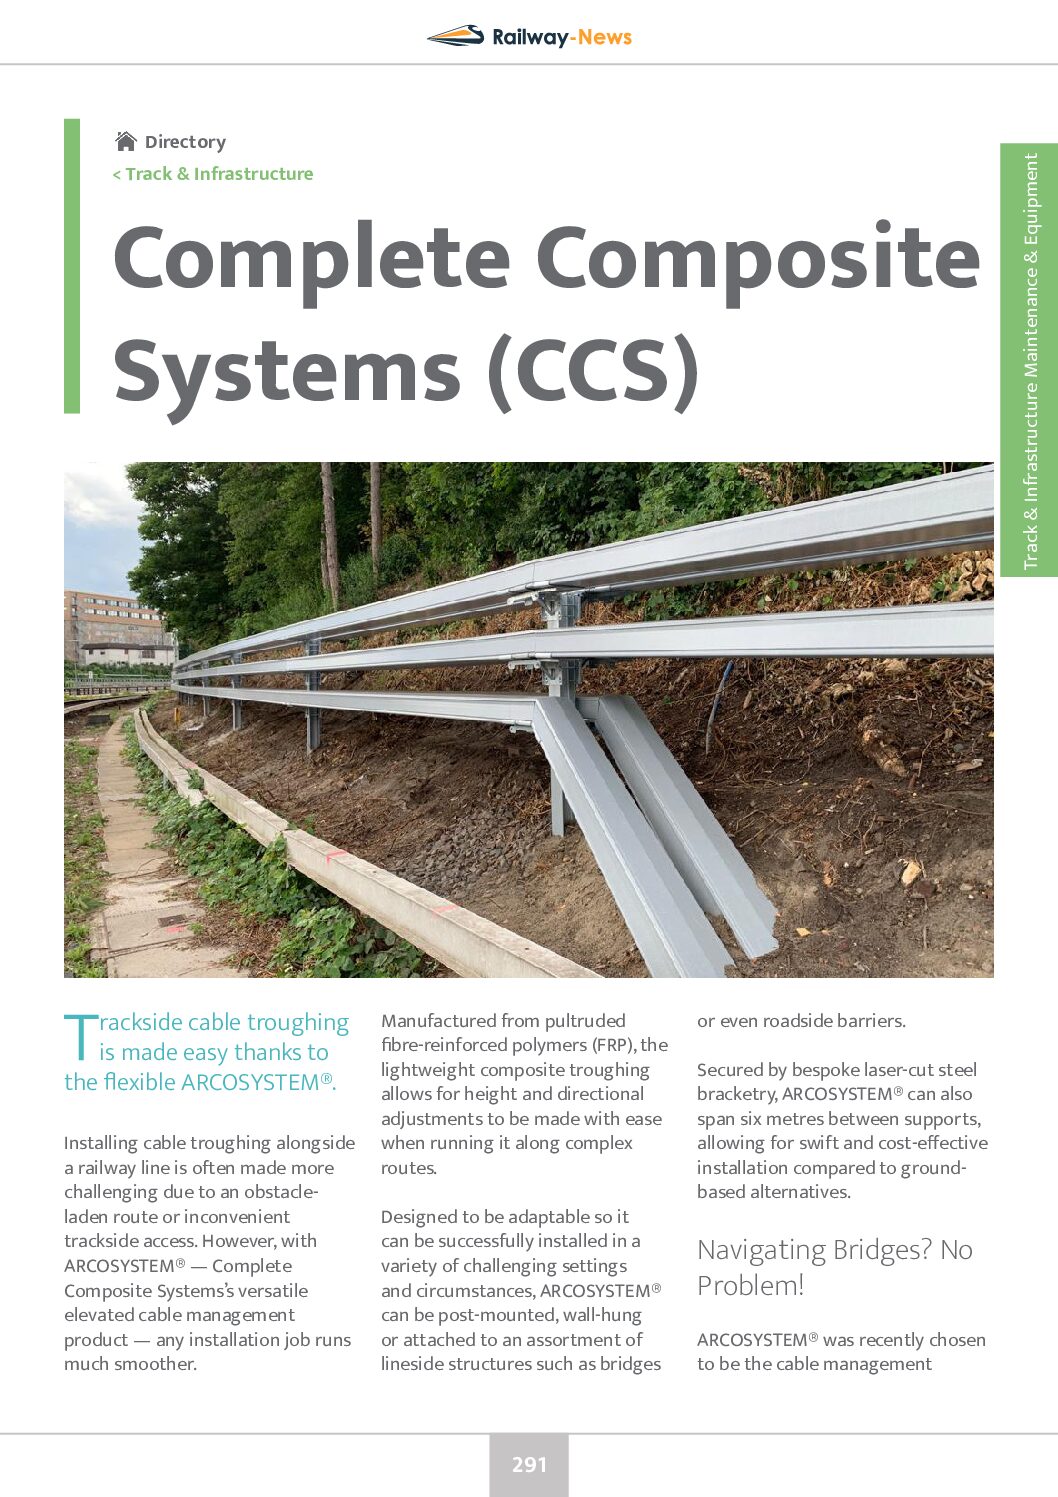 Trackside Cable Troughing Made Easy Thanks to ARCOSYSTEM®